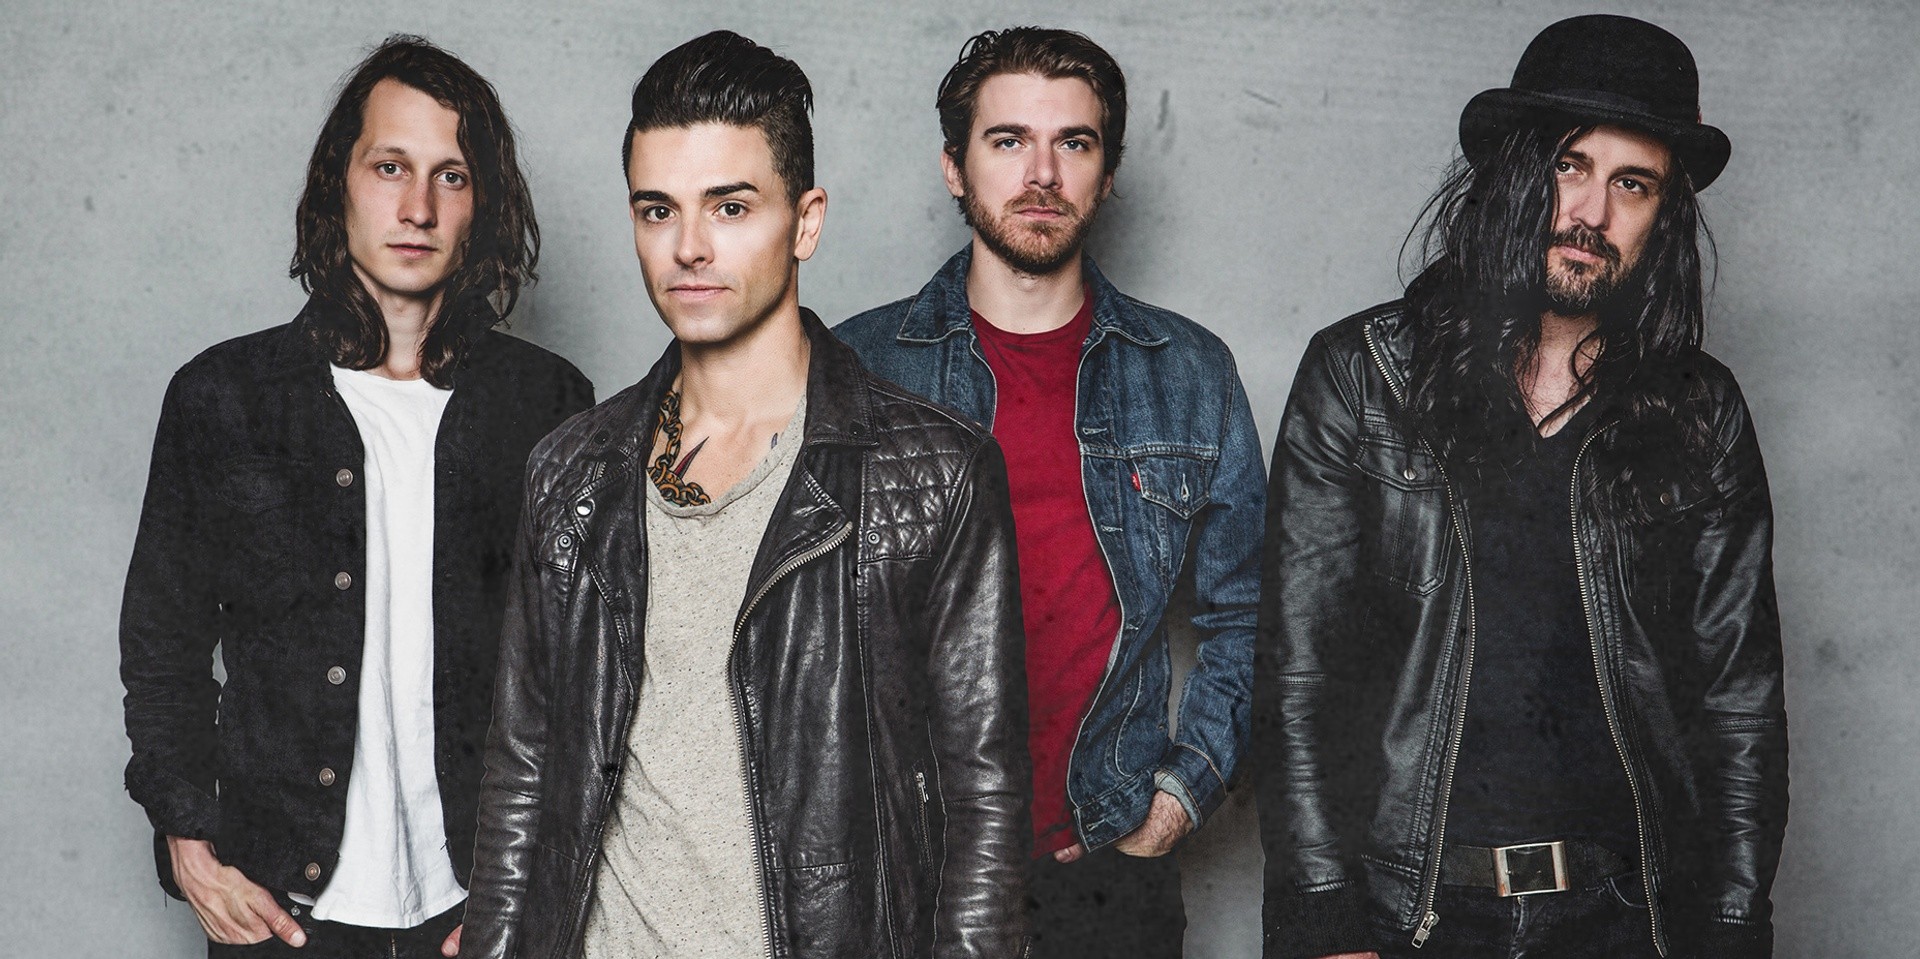 Dashboard Confessional will be returning to Singapore, as a full band this time